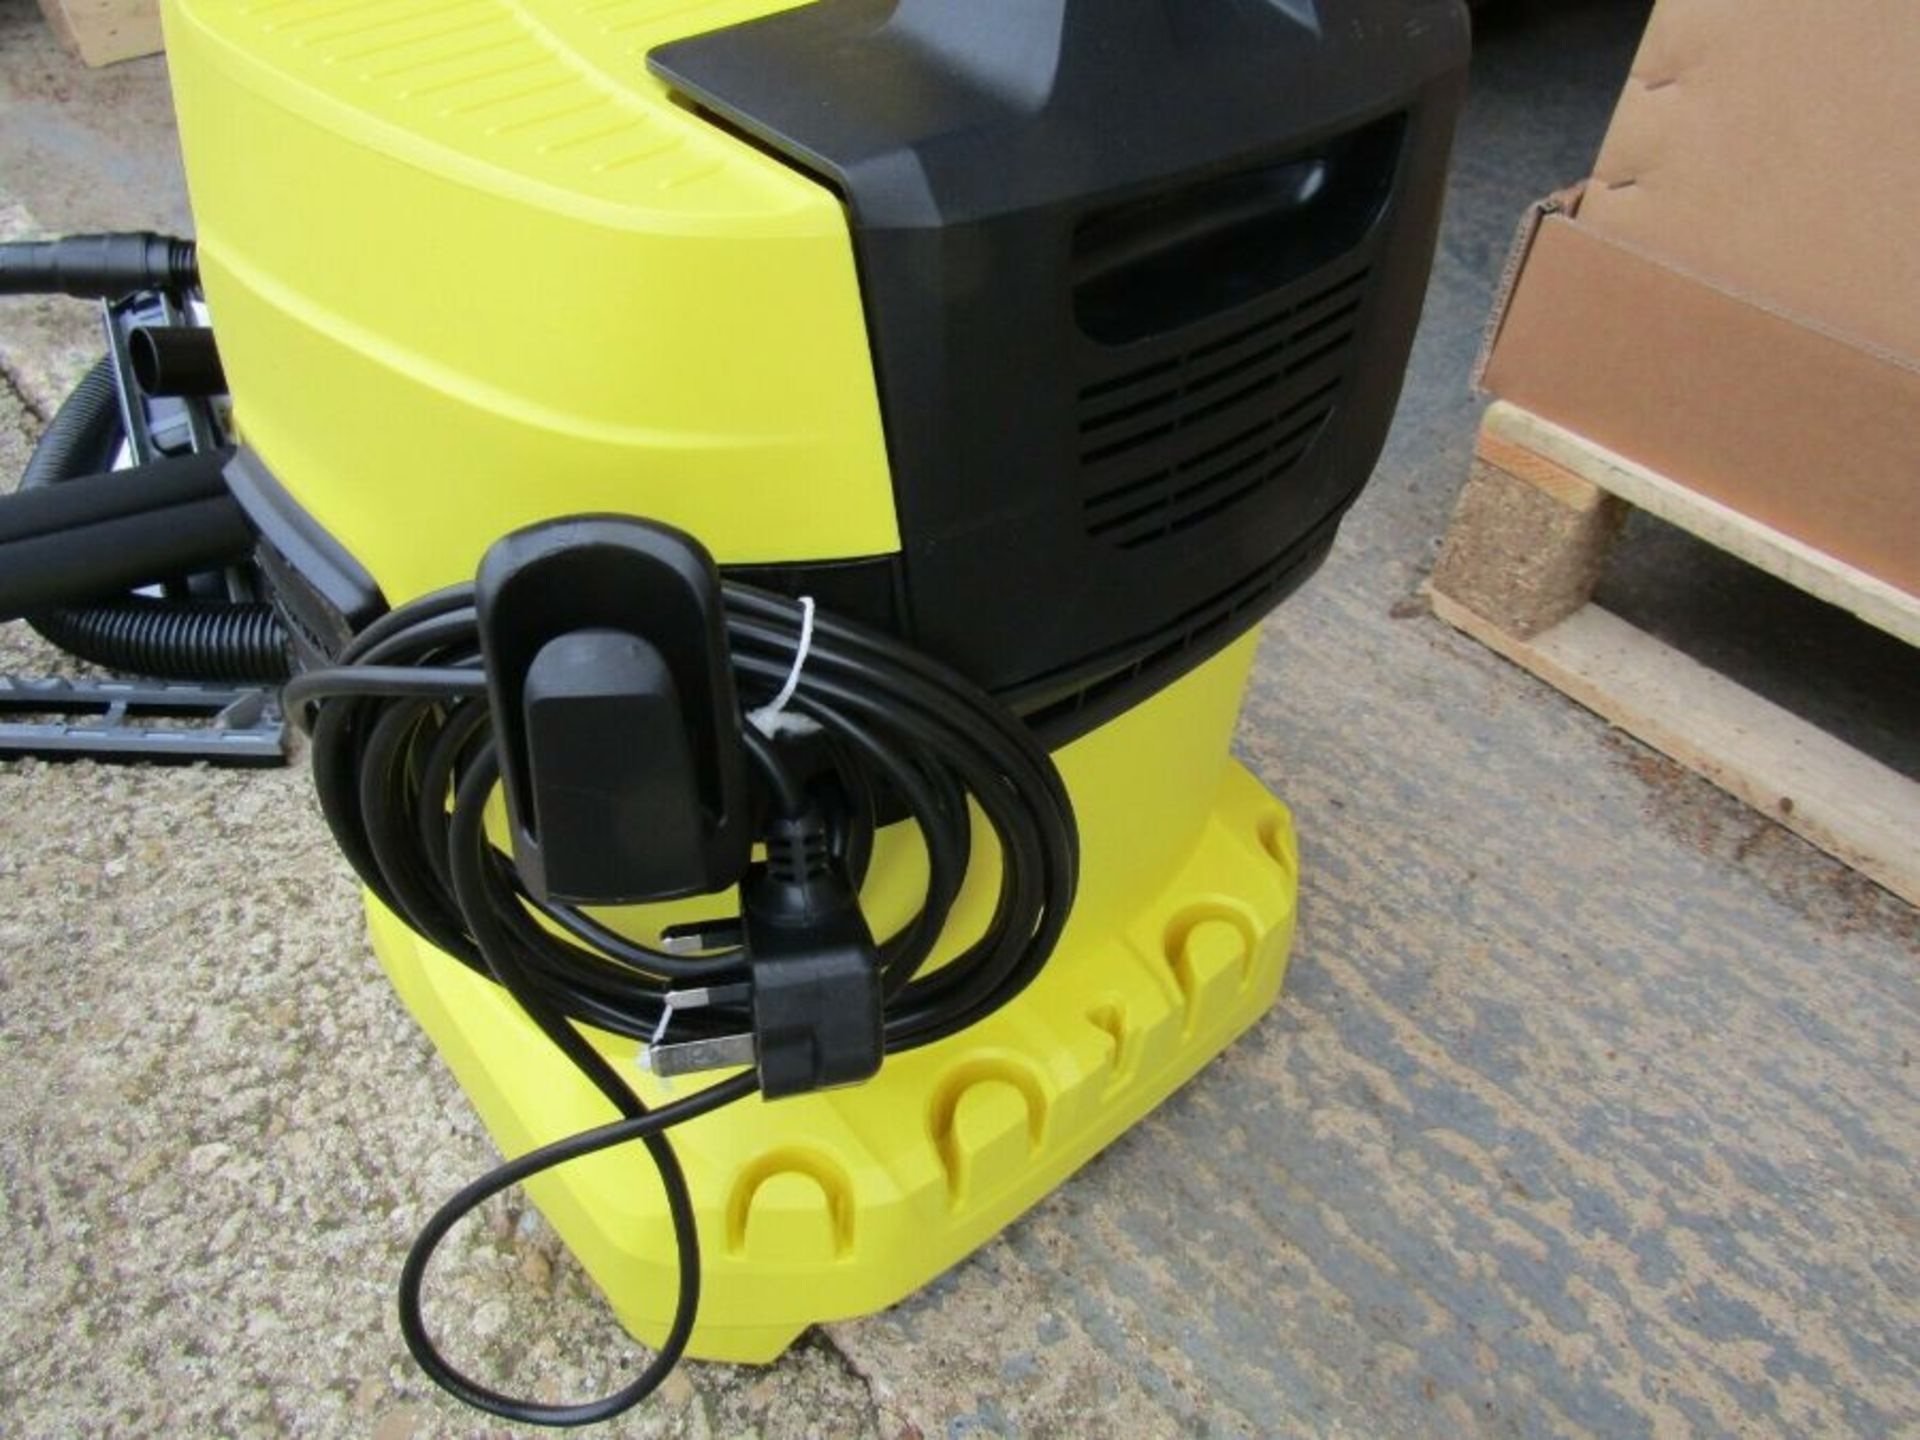 NEW Karcher WD 4 Wet and Dry Vacuum Cleaner - Yellow - UK Plug Blk 1931654 - Image 2 of 4